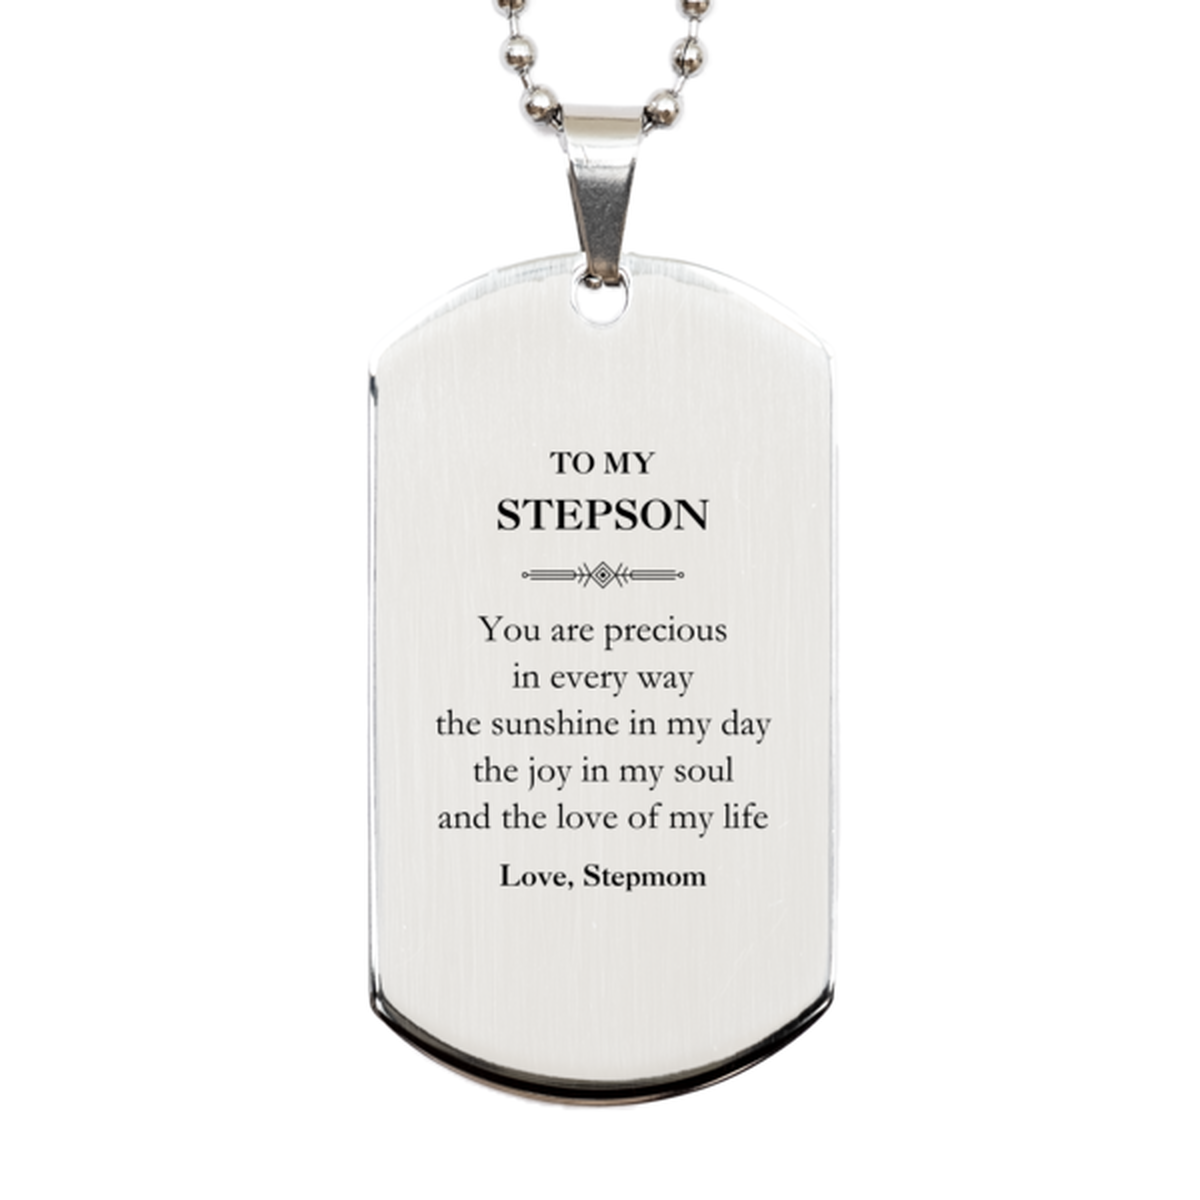 Graduation Gifts for Stepson Silver Dog Tag Present from Stepmom, Christmas Stepson Birthday Gifts Stepson You are precious in every way the sunshine in my day. Love, Stepmom